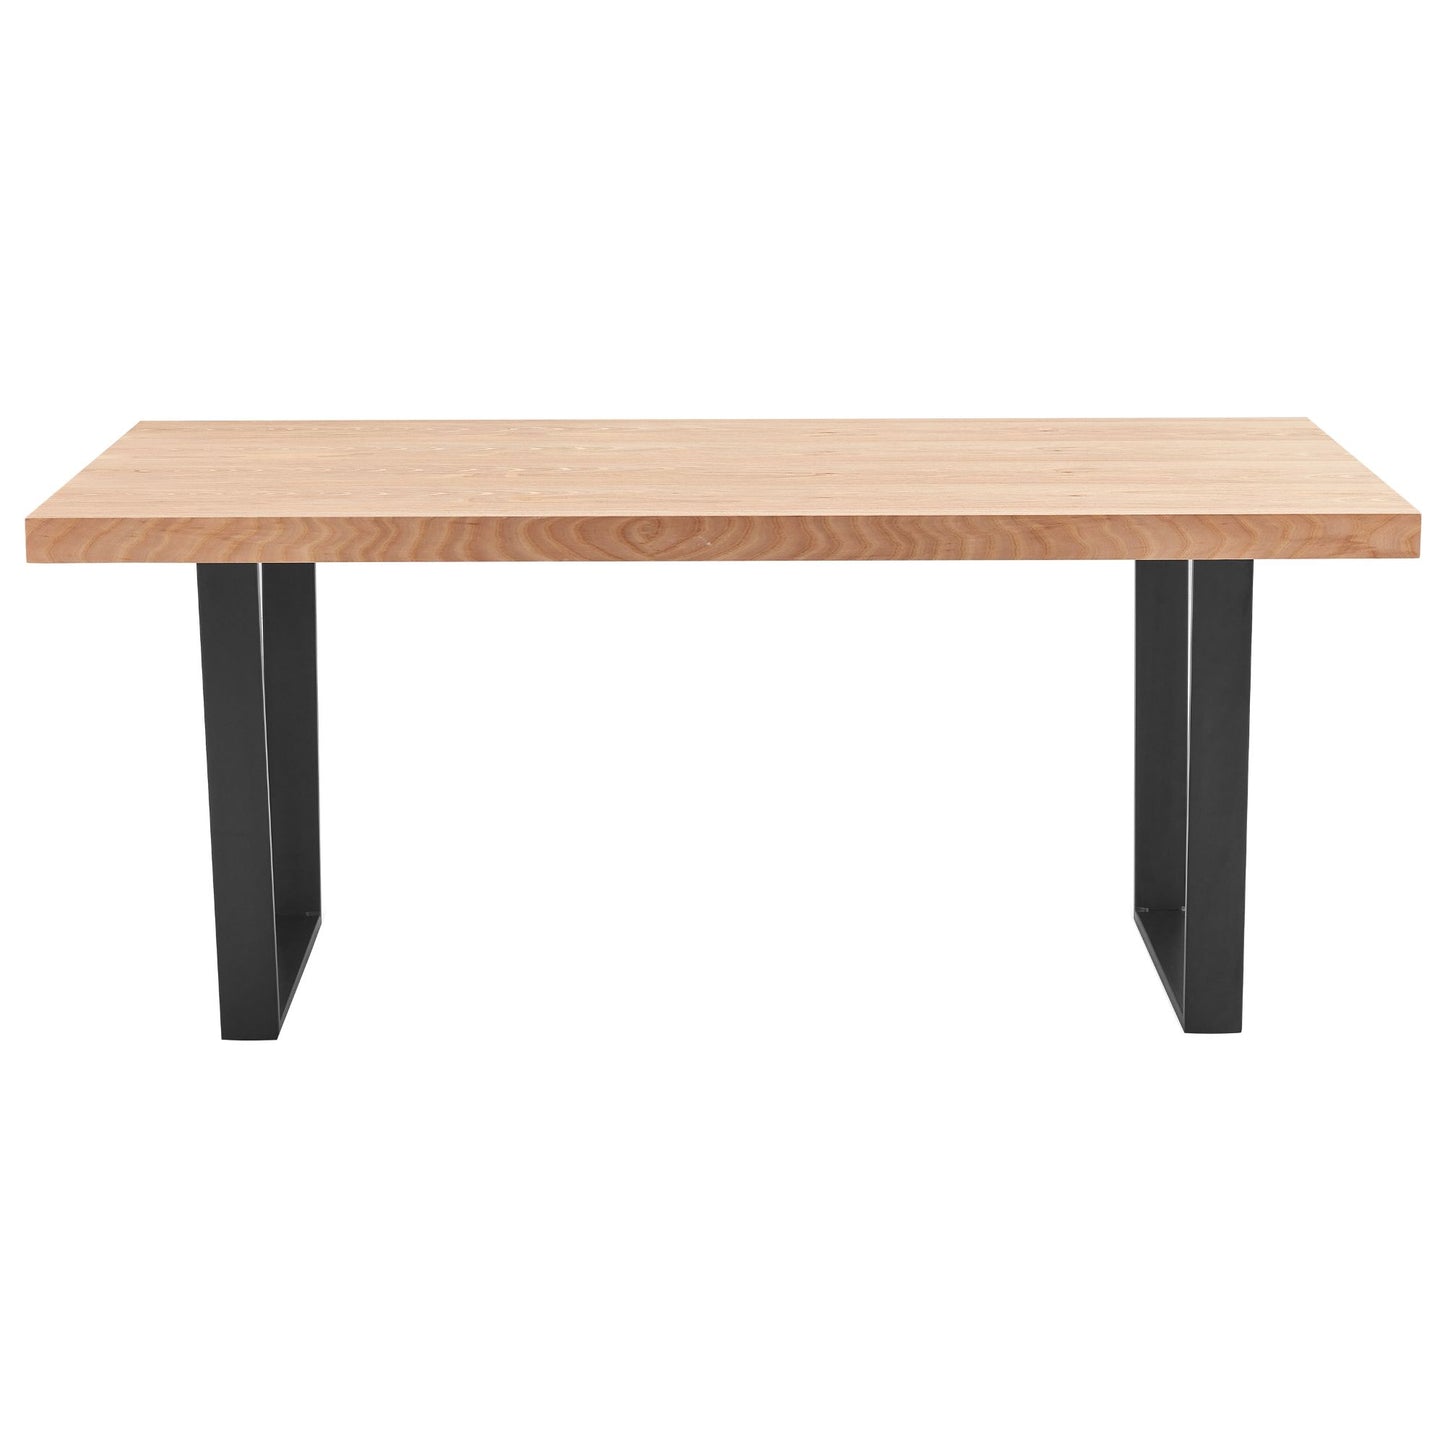 Elm Timber Wood Dining Table with Black Metal Leg 210cm - Natural